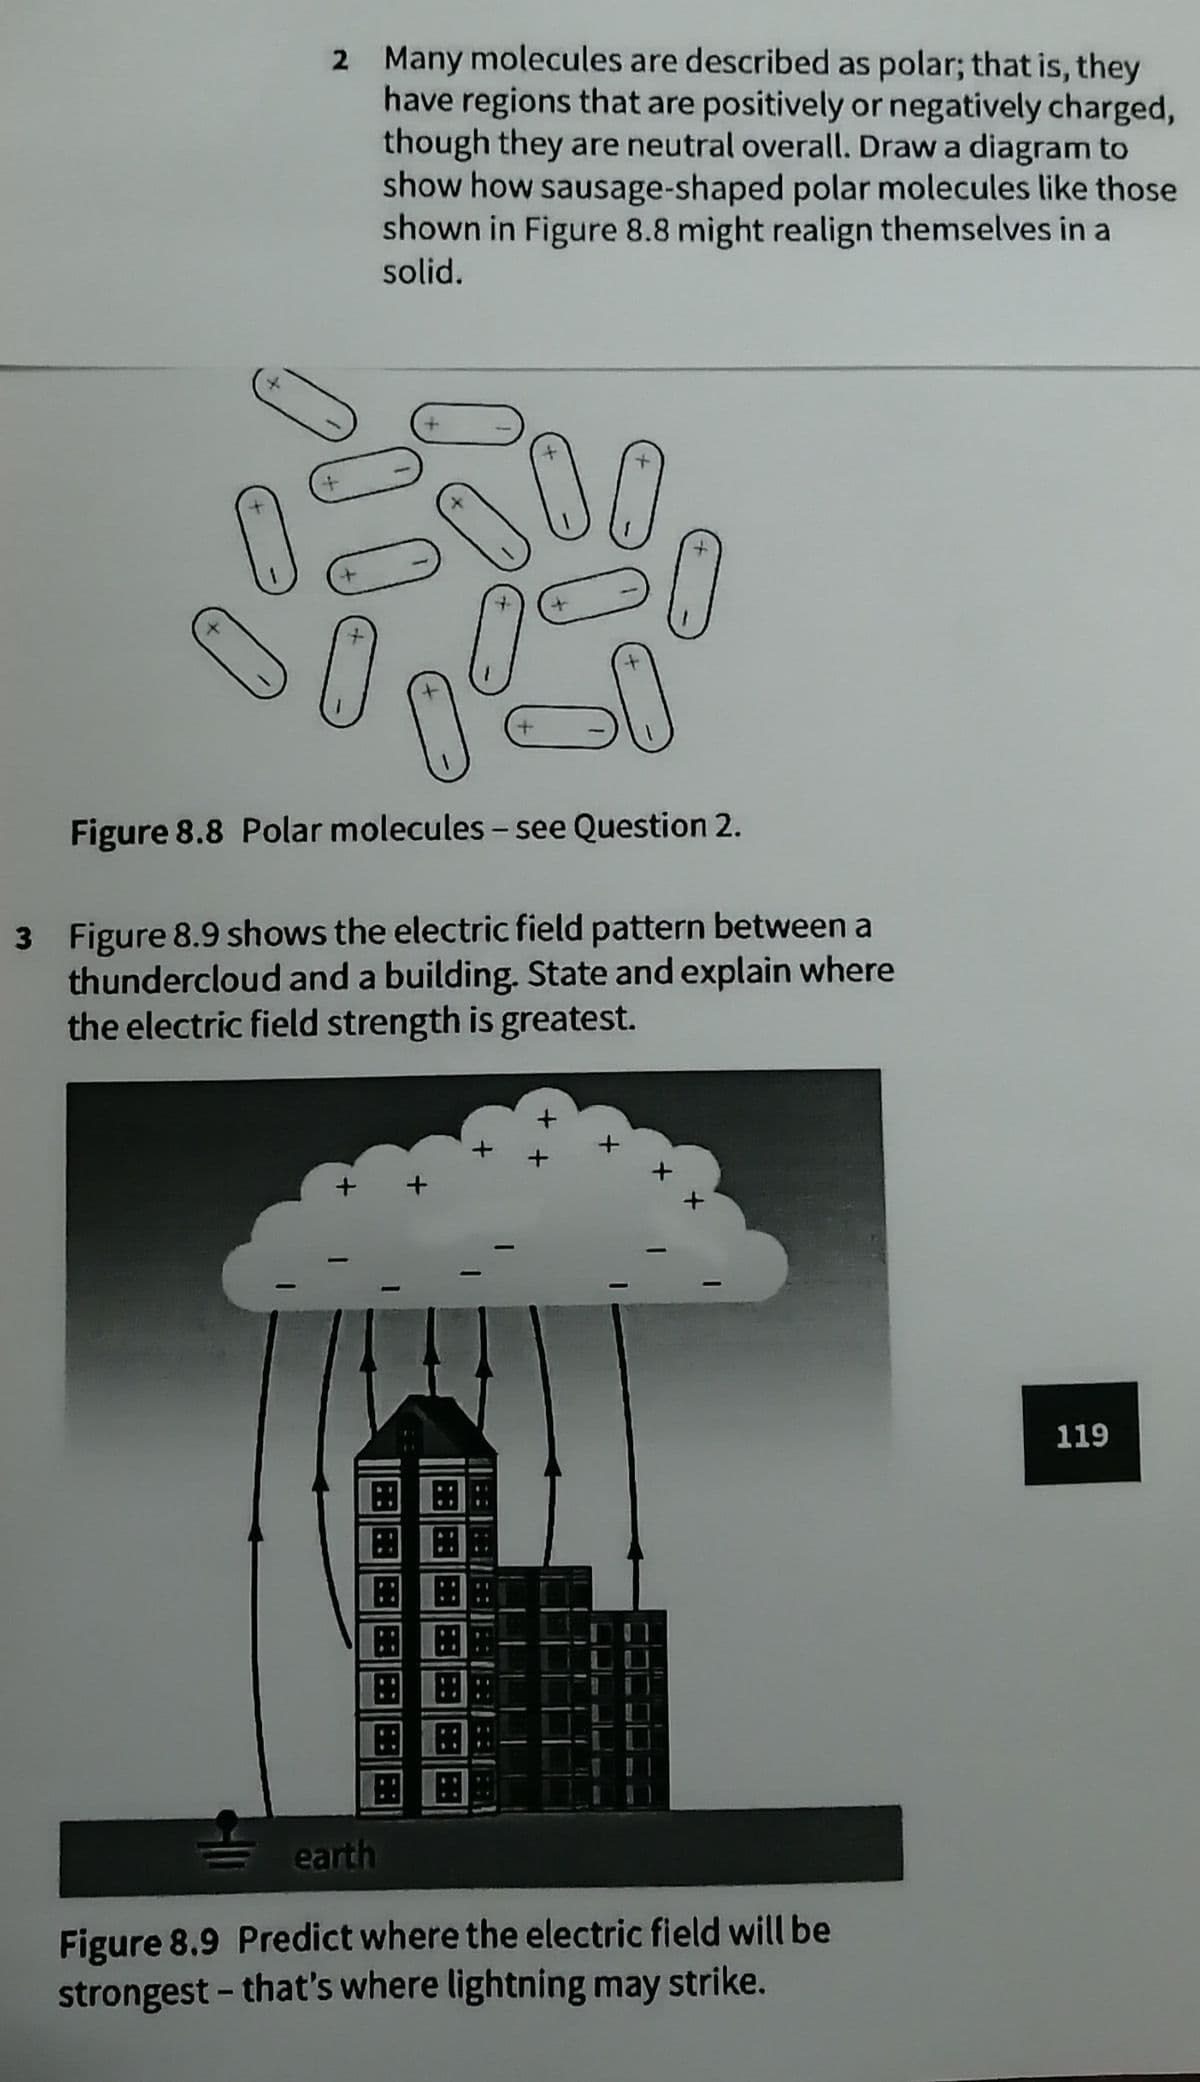 2 Many molecules are described as polar; that is, they
have regions that are positively or negatively charged,
though they are neutral overall. Draw a diagram to
show how sausage-shaped polar molecules like those
shown in Figure 8.8 might realign themselves in a
solid.
Figure 8.8 Polar molecules – see Question 2.
3 Figure 8.9 shows the electric field pattern between a
thundercloud and a building. State and explain where
the electric field strength is greatest.
119
田田
田田
earth
Figure 8.9 Predict where the electric field will be
strongest - that's where lightning may strike.
